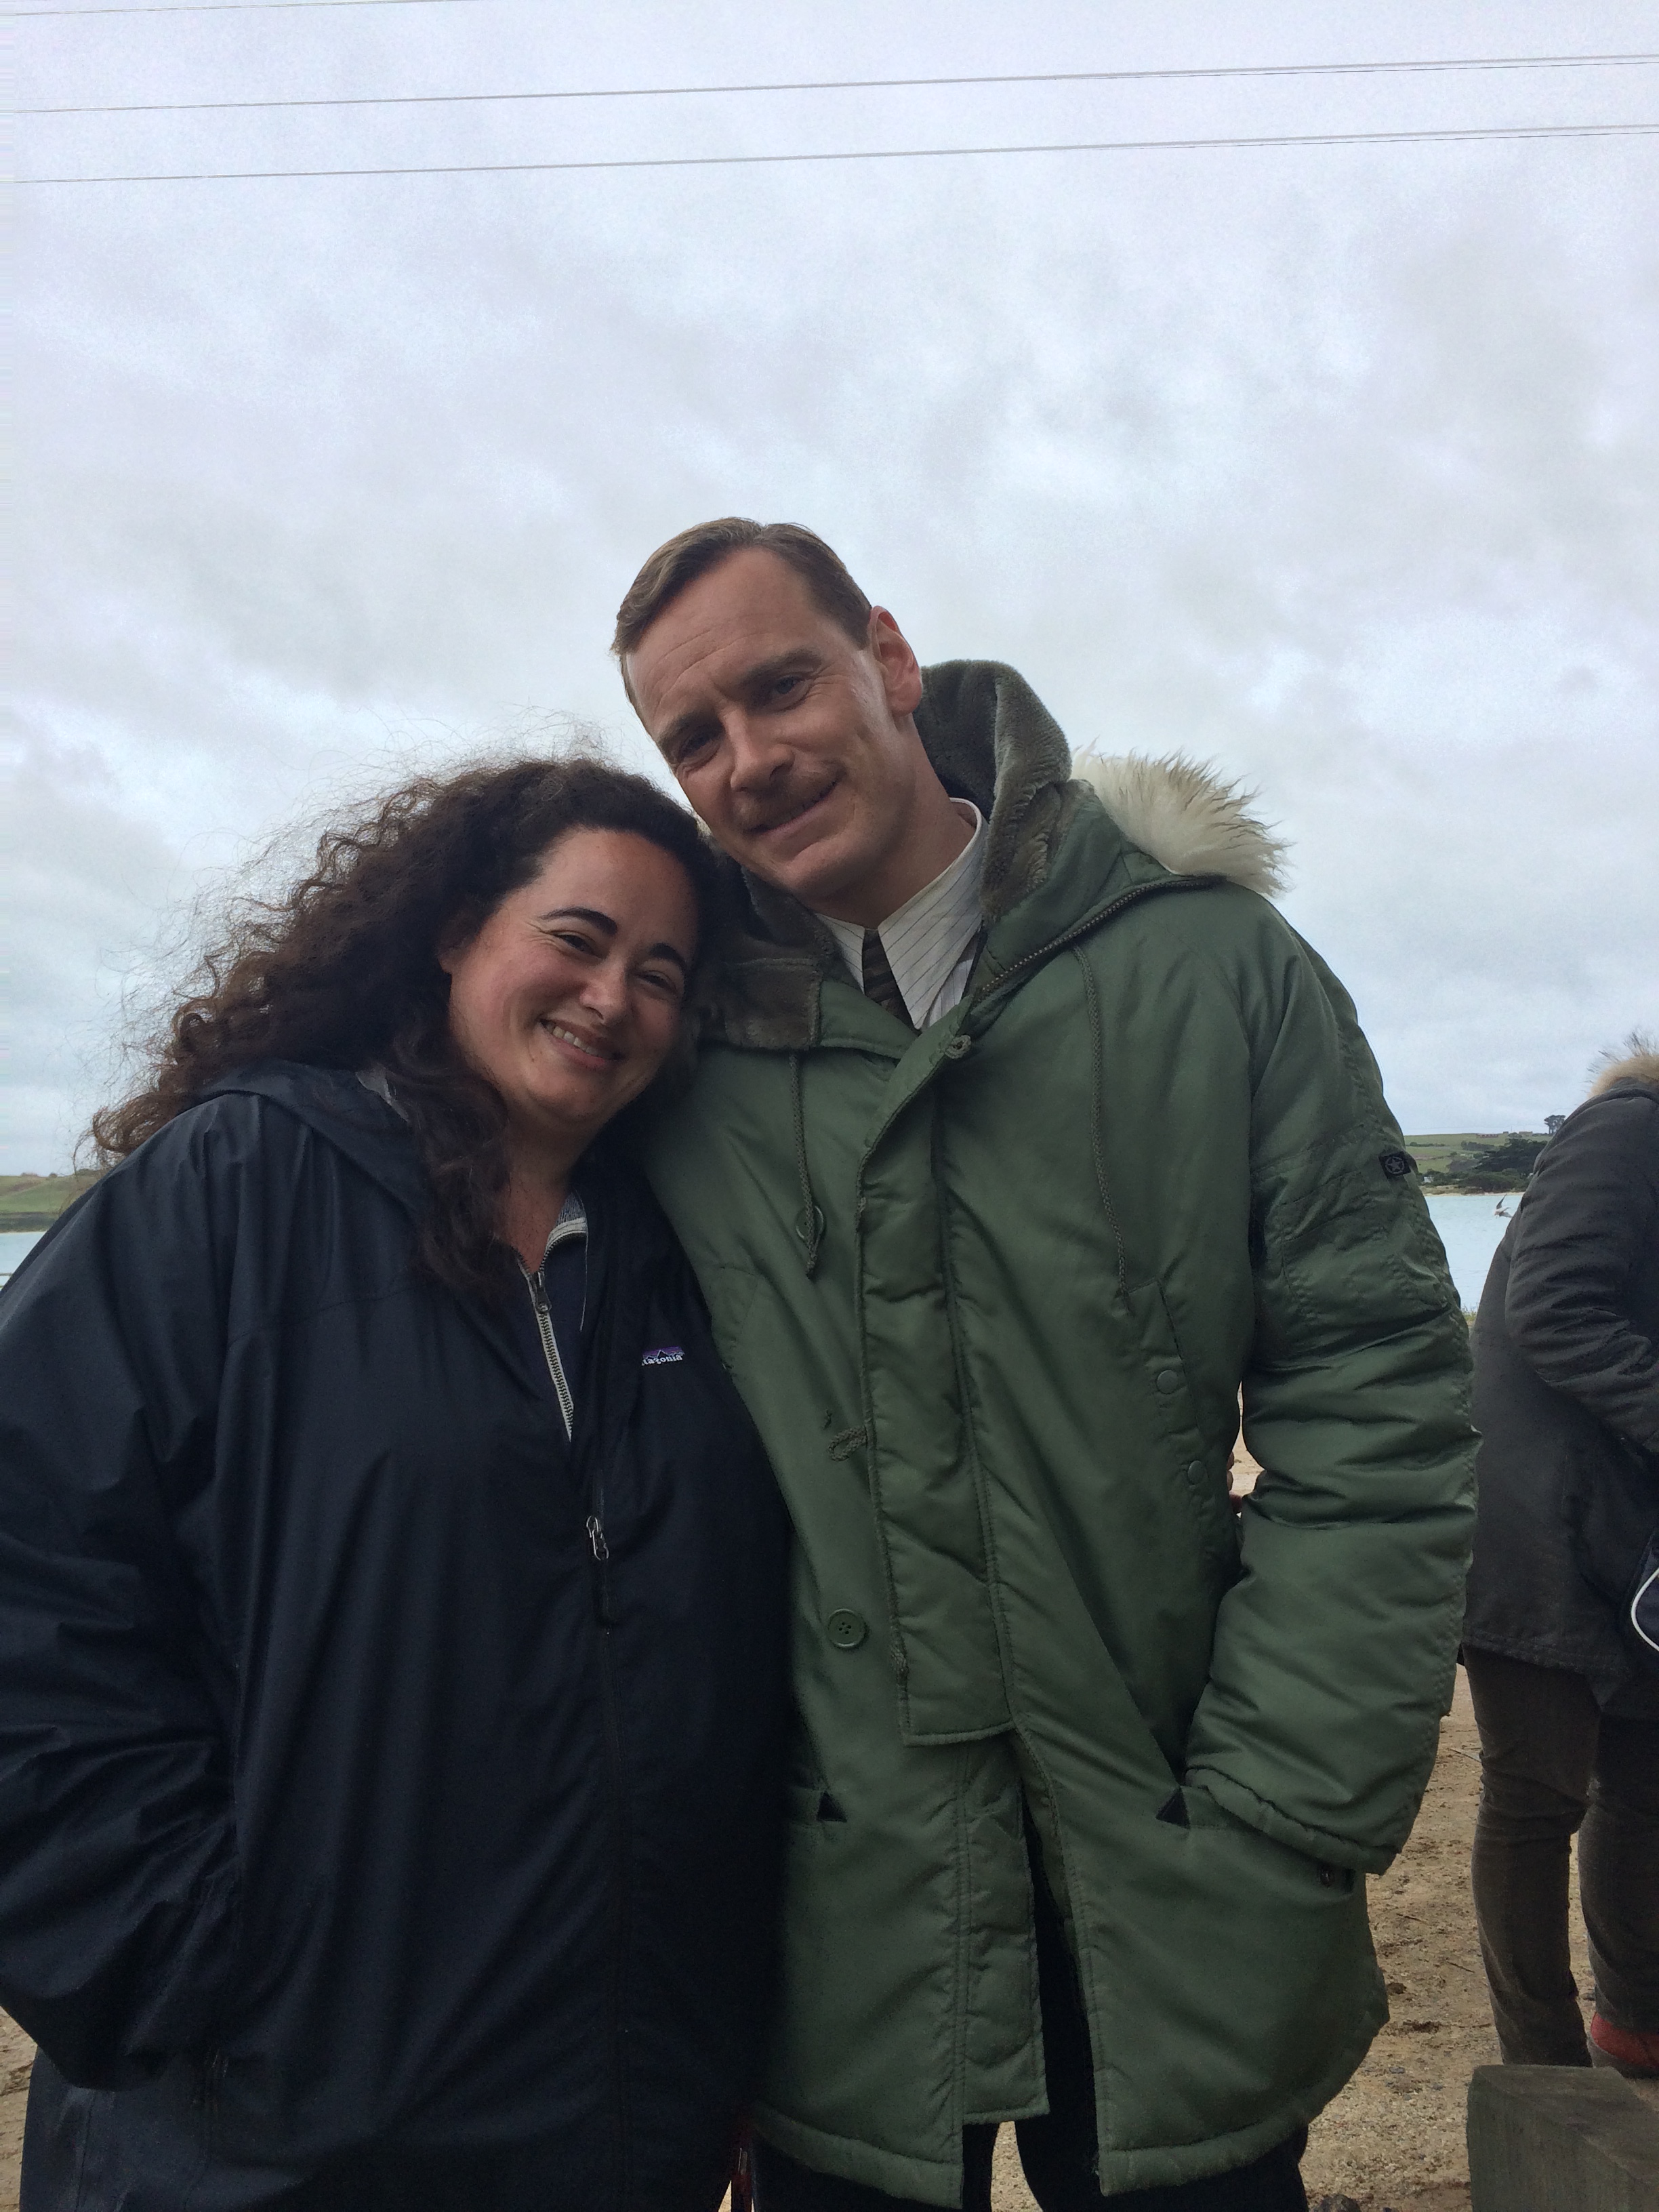 On set -- The Light Between Oceans with Michael Fassbender